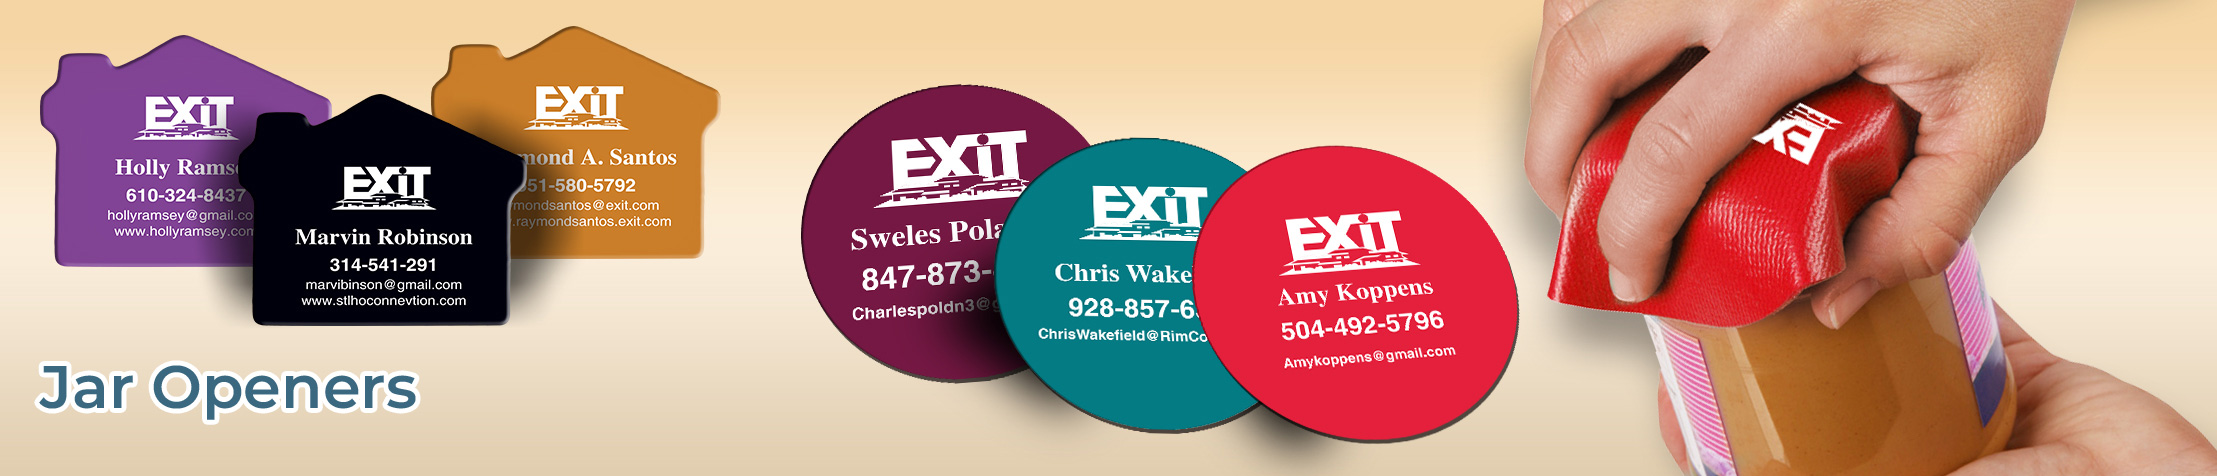 Exit Realty Real Estate Jar Openers - Exit Realty approved vendor personalized realtor promotional products | BestPrintBuy.com